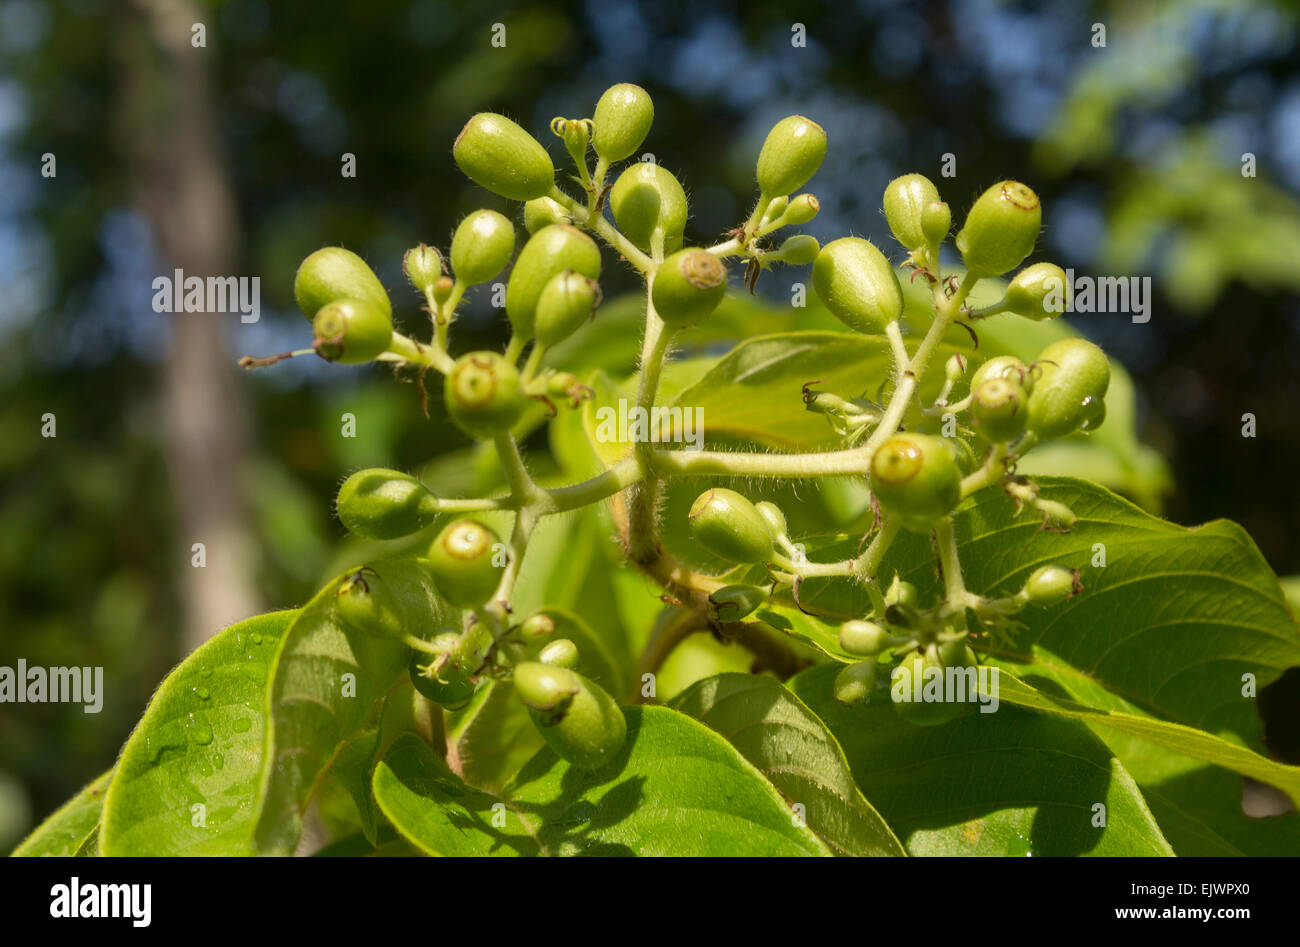 it is a fruit or nut of a wild plant found in the jungle, scientific name unknown to me. Stock Photo